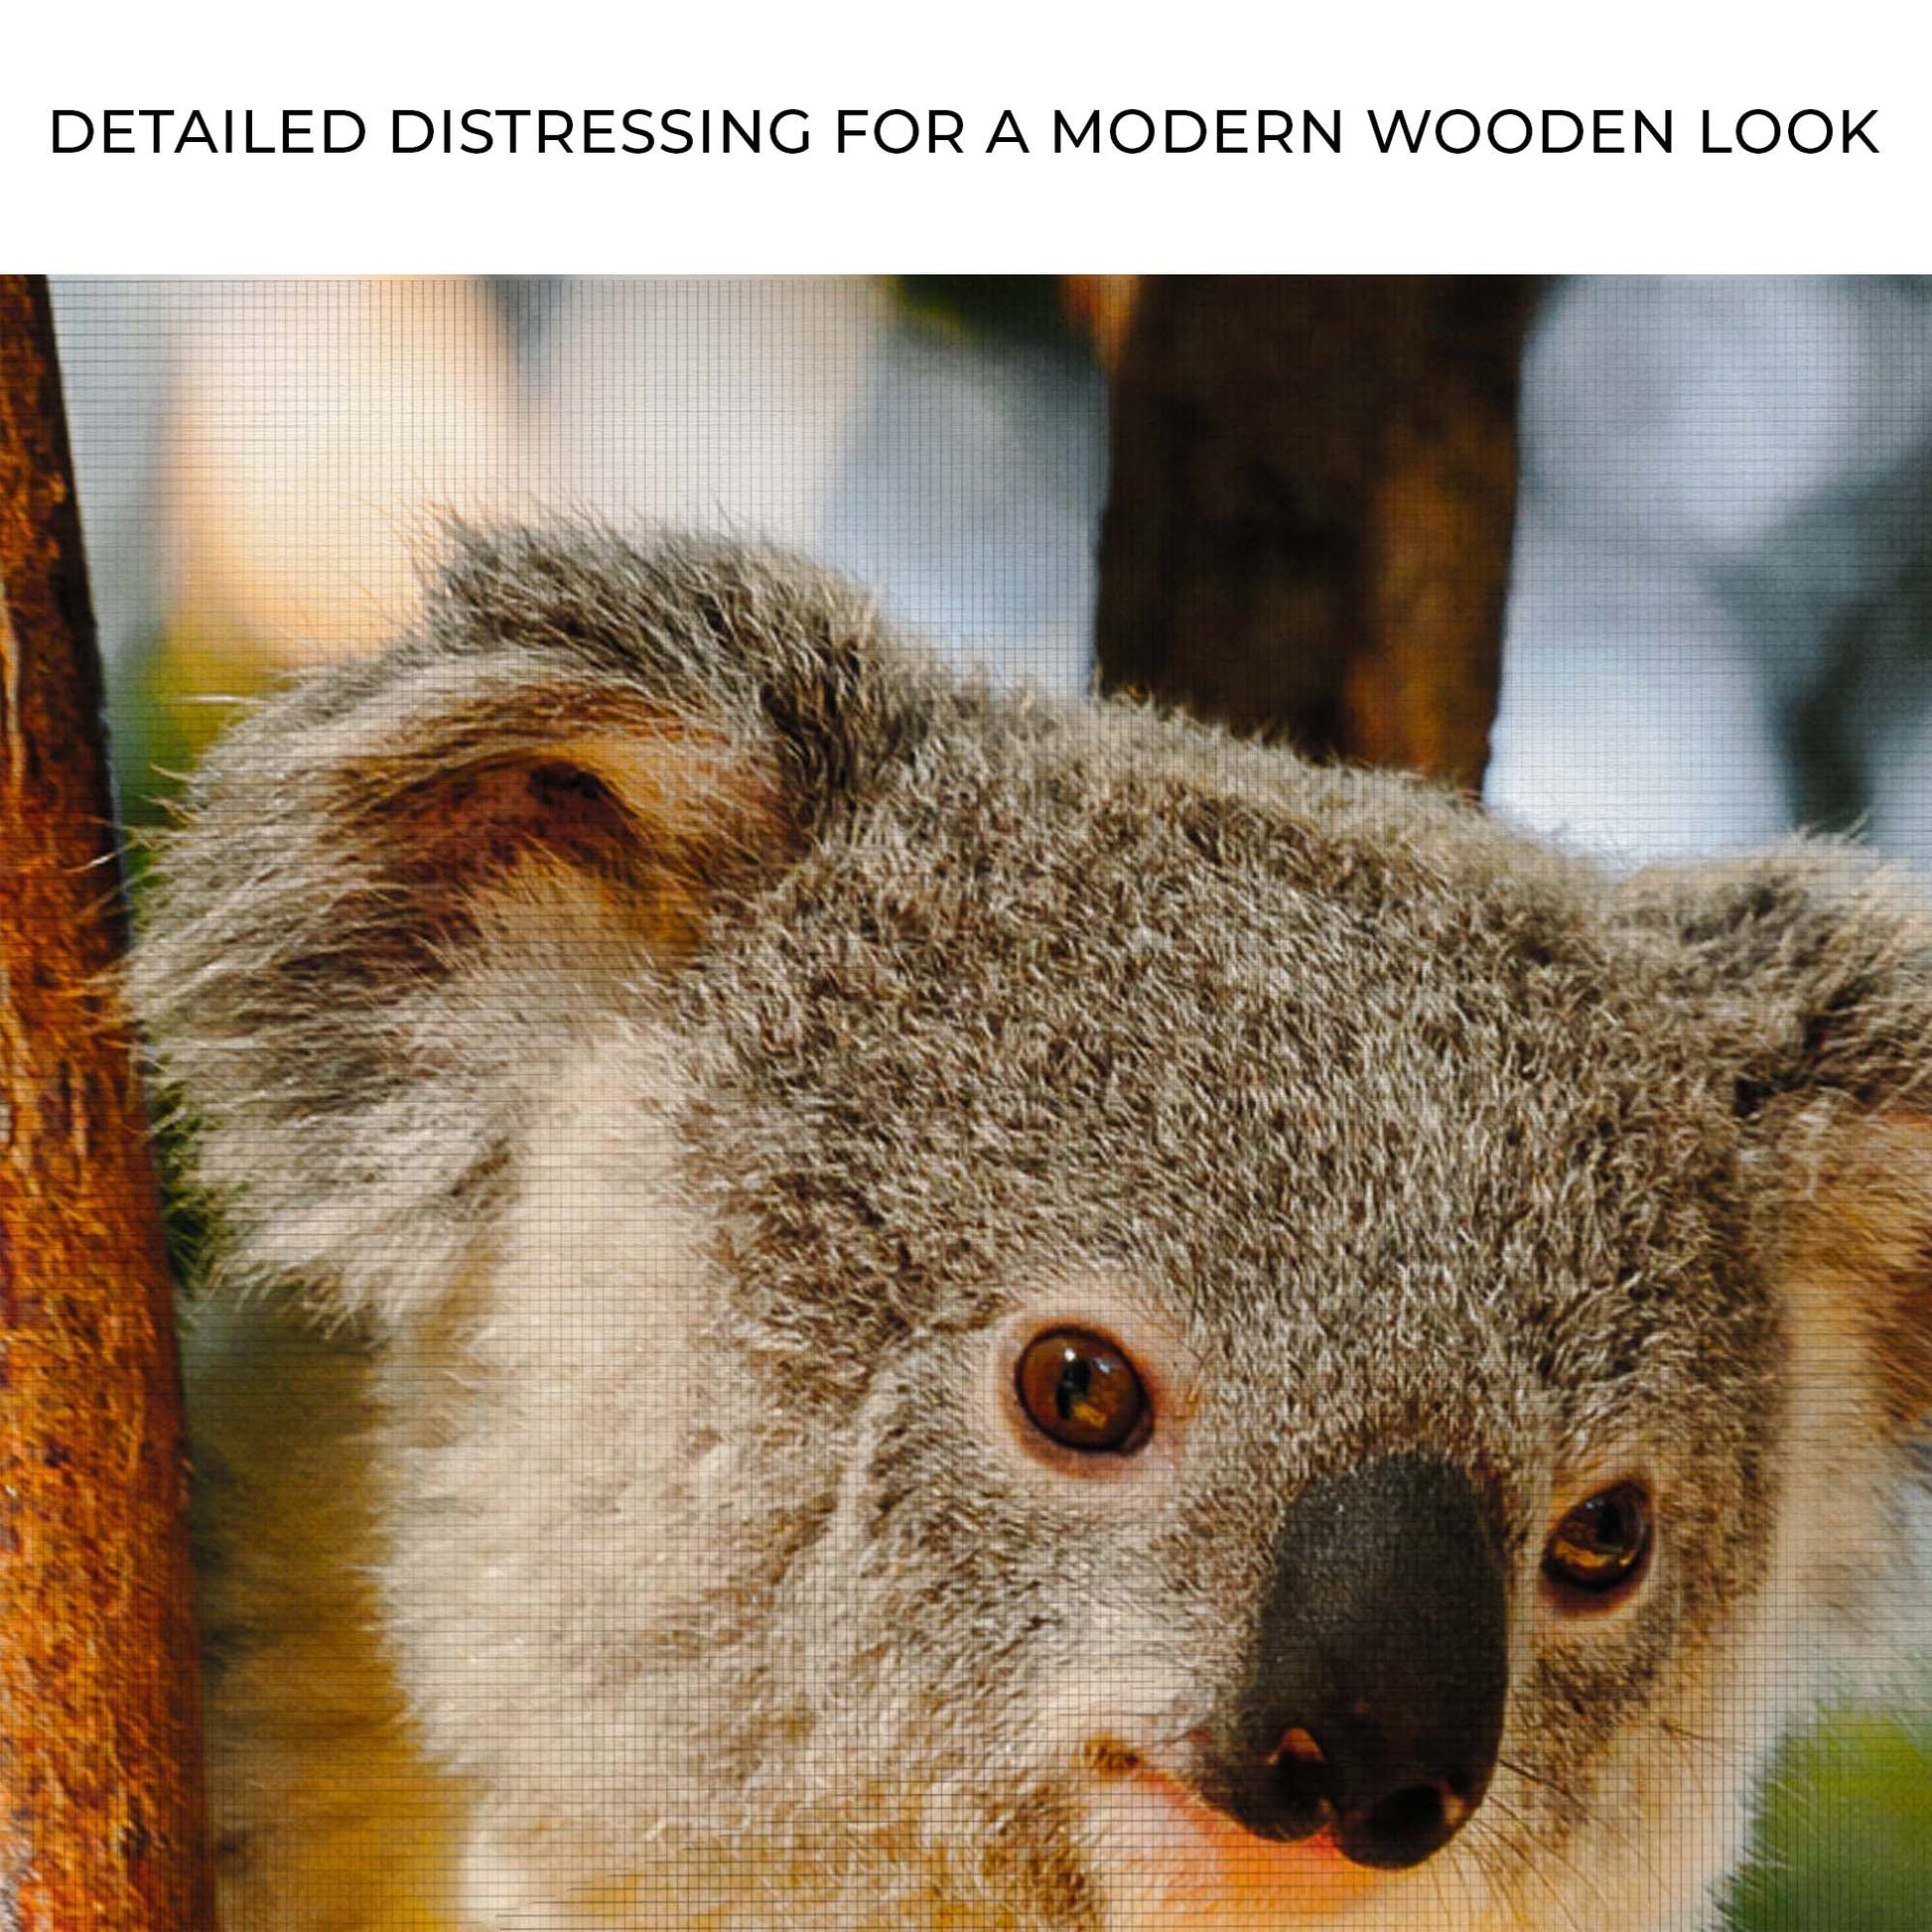 Photogenic Koala  Canvas Wall Art in the Forest